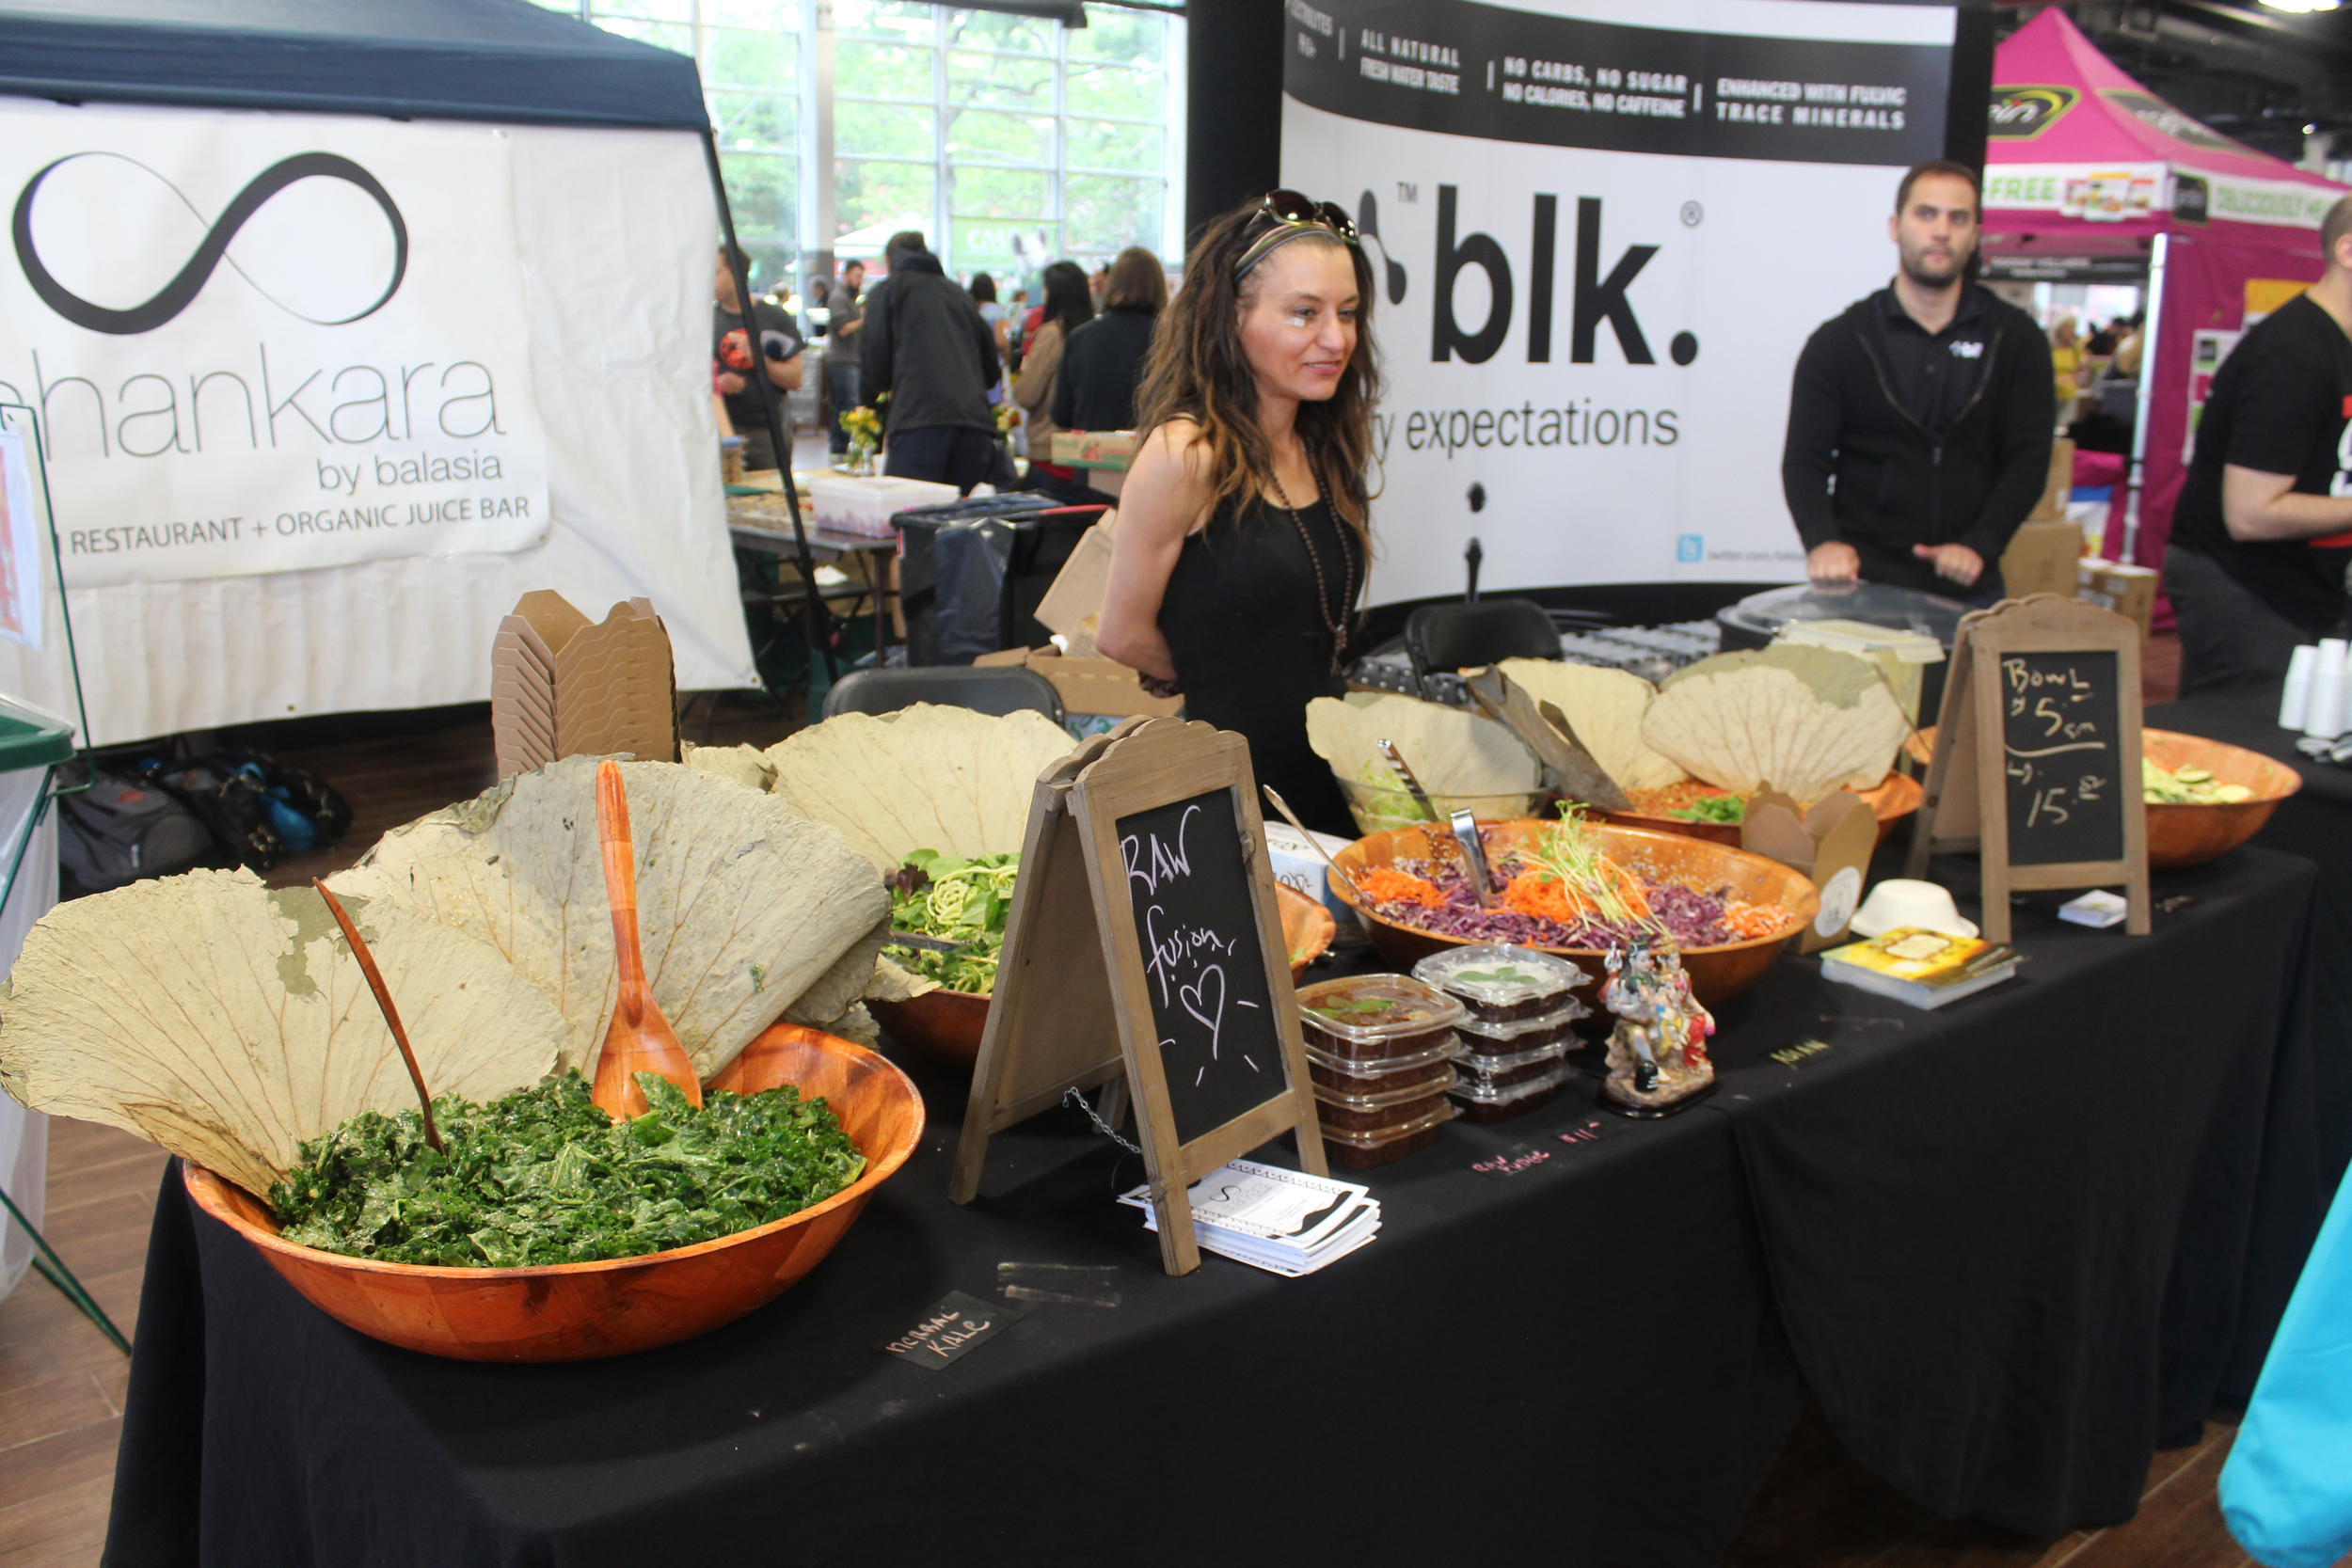  With greens galore, the expo area was the best place to munch on health foods during sessions. 